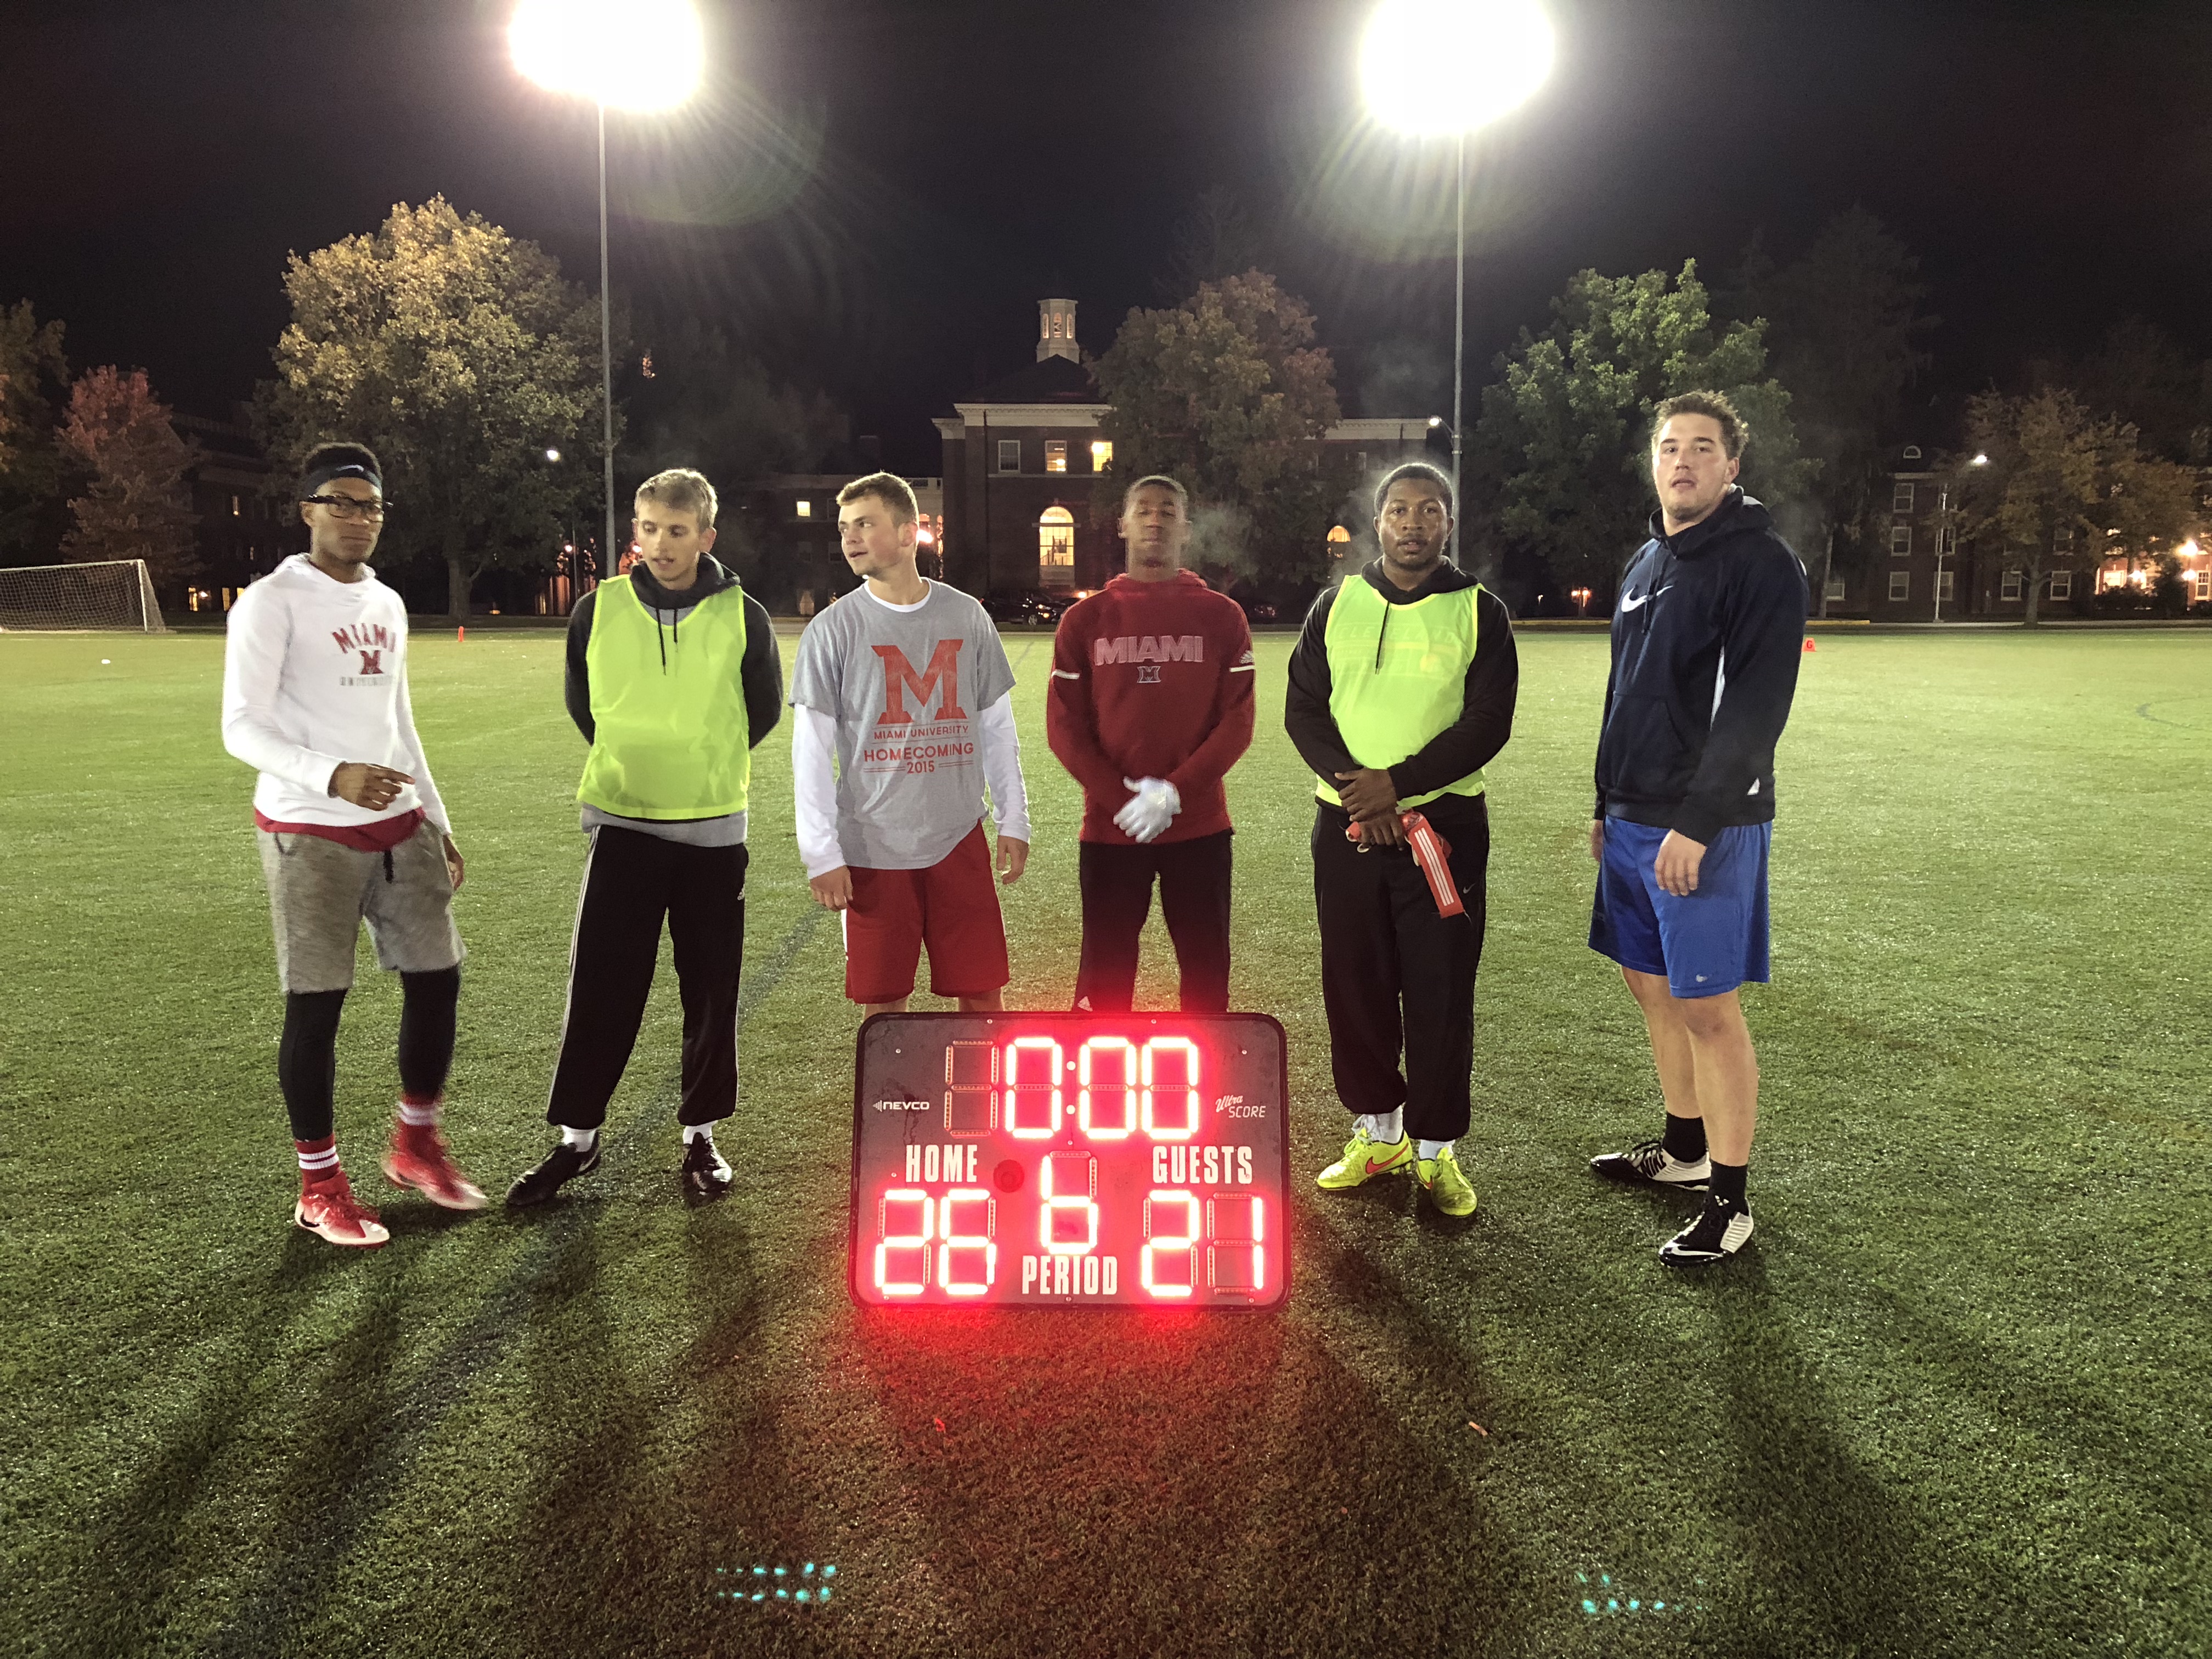 Flag football runner up team for Fall 2018 poses with final game scoreboard.